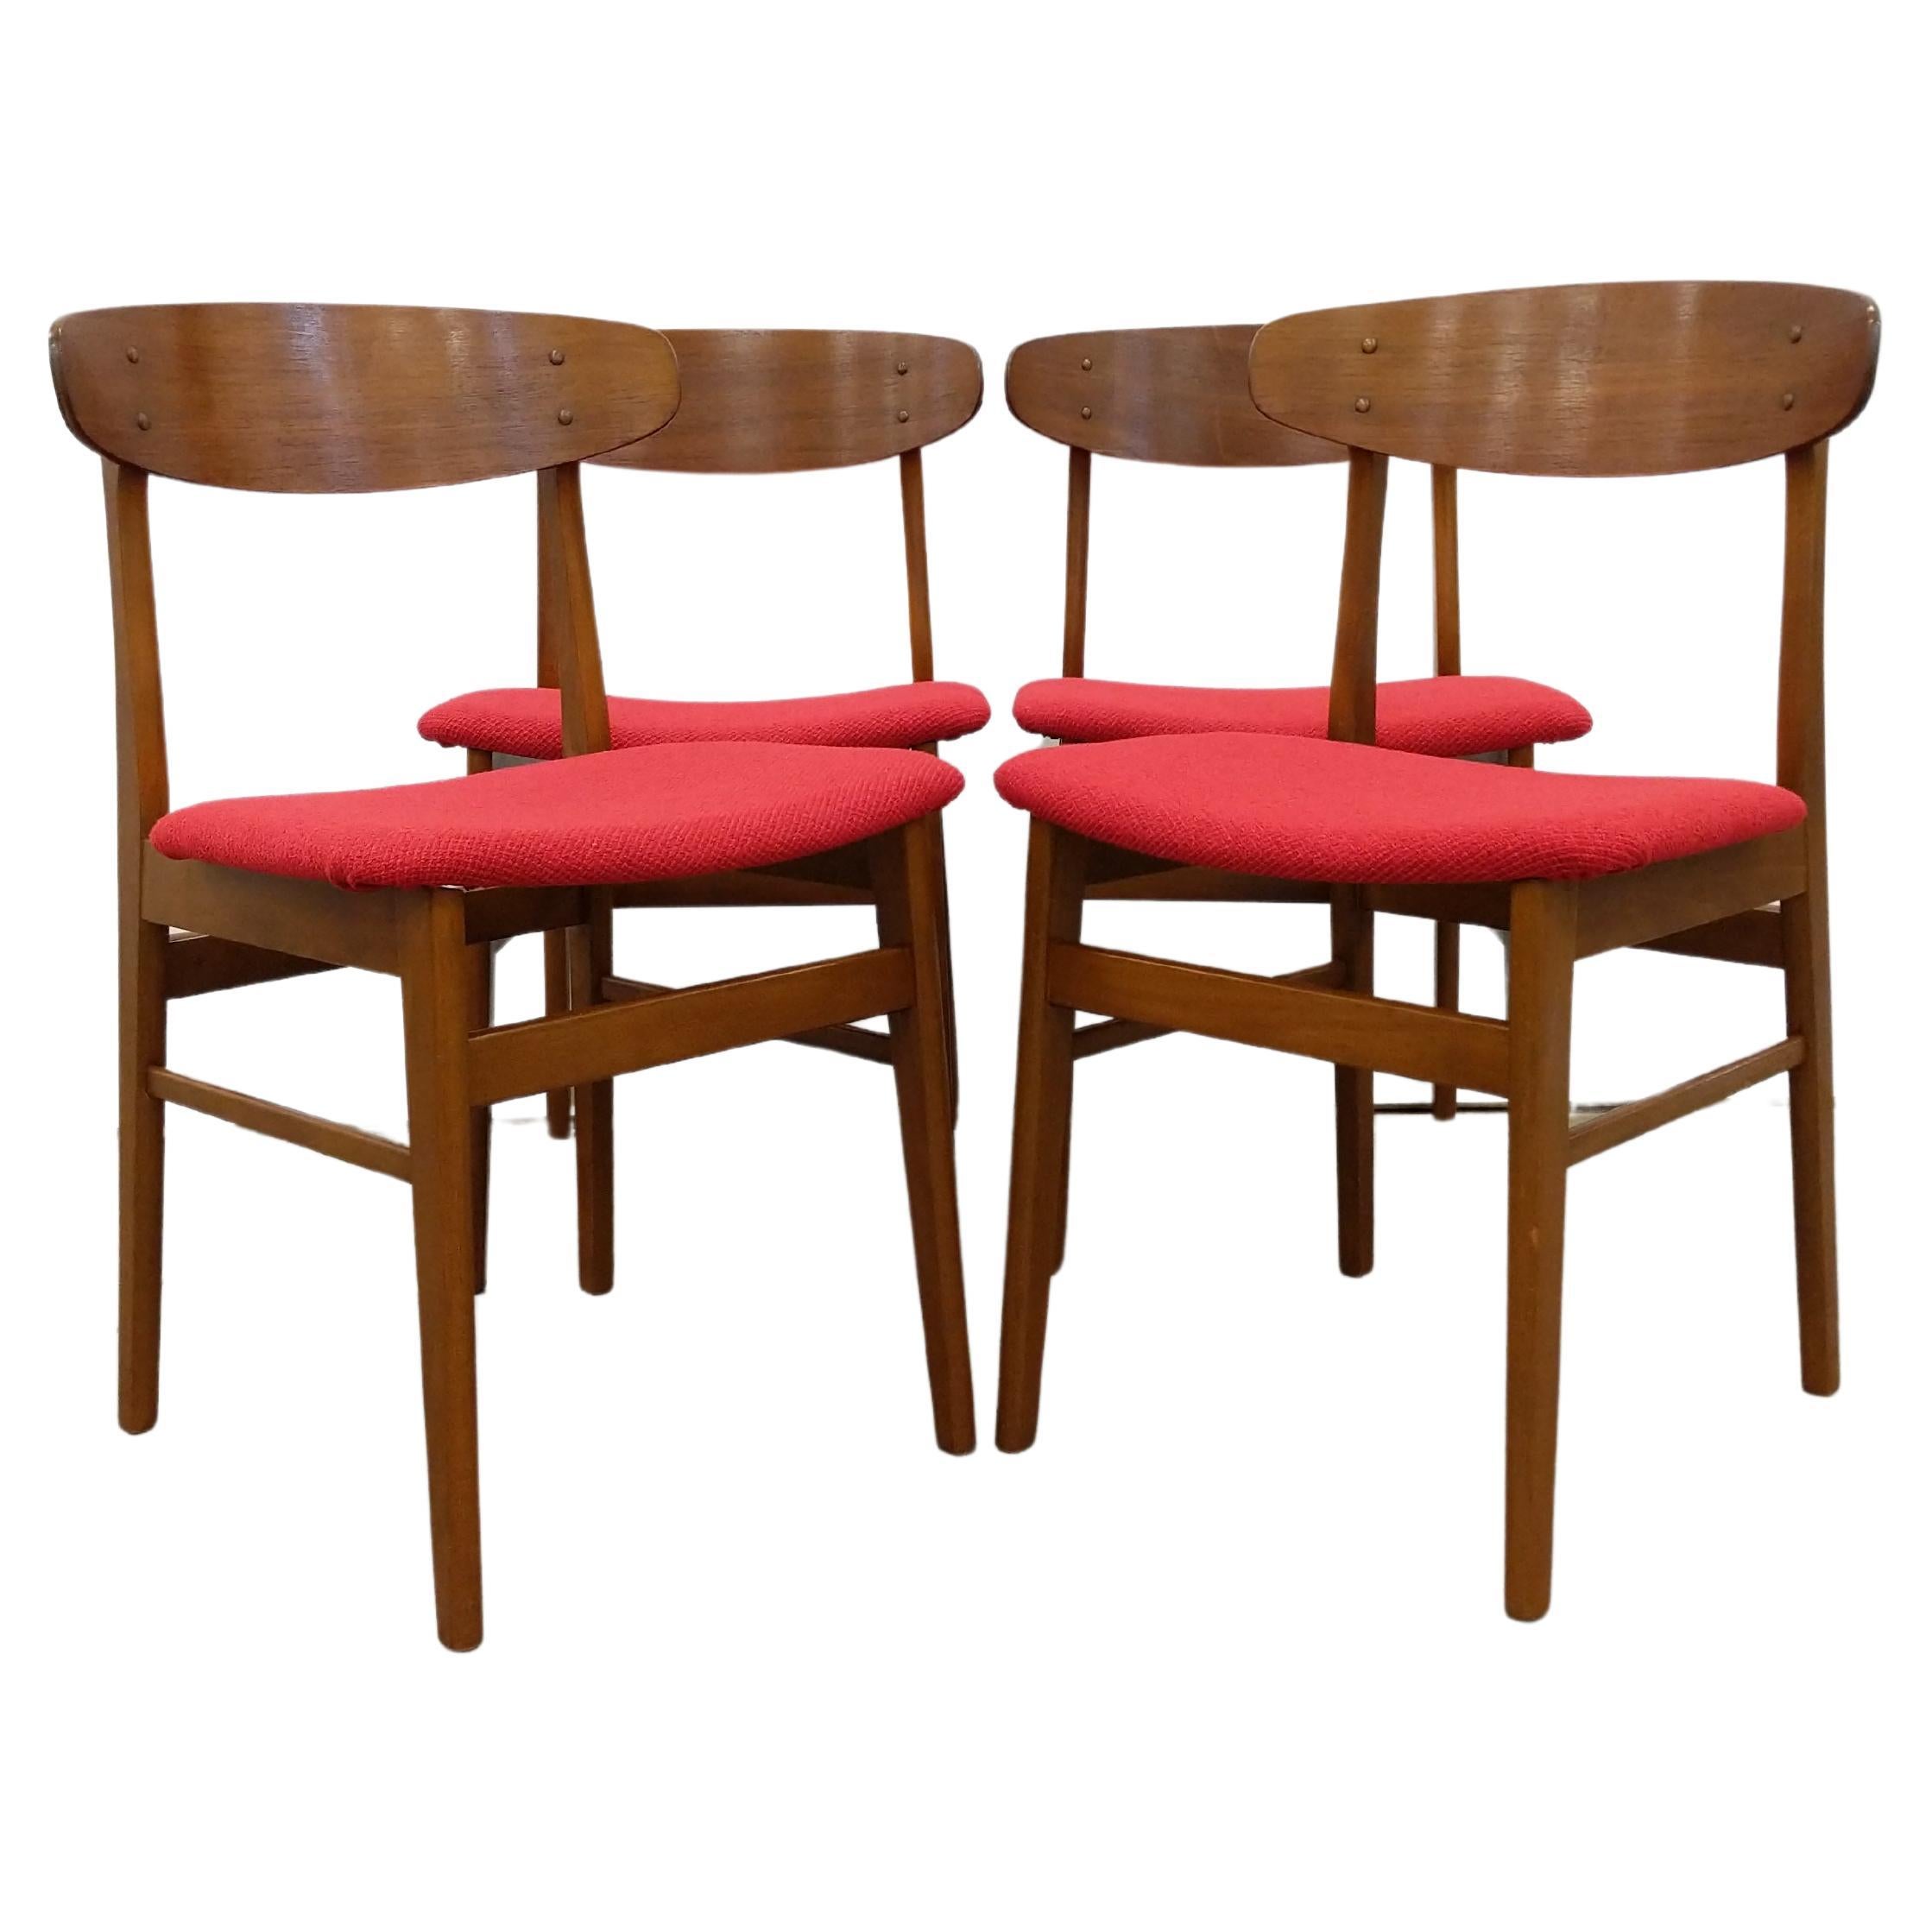 Set of 4 Vintage Danish Mid Century Modern Dining Chairs For Sale